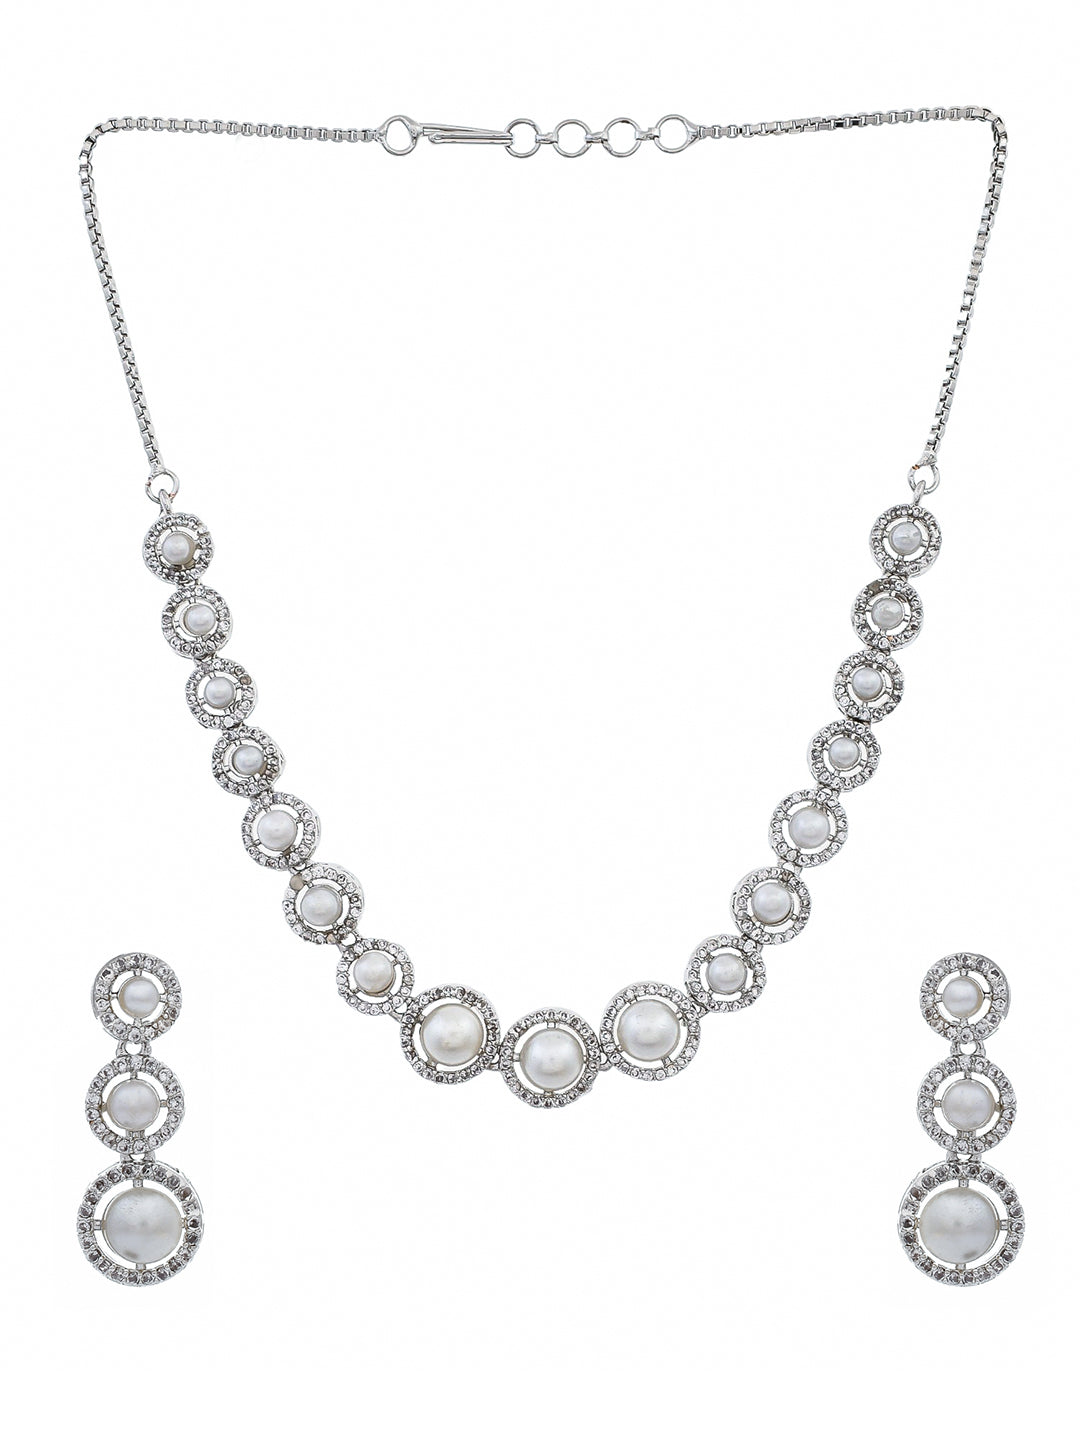 Shop This American Diamond jewellery set for women/girls features stunning and intricately crafted pieces that will elevate any outfit. Made with high-quality materials, this set exudes elegance and sophistication. Perfect for any occasion, this set will surely make a statement and add a touch of glamour to your look.